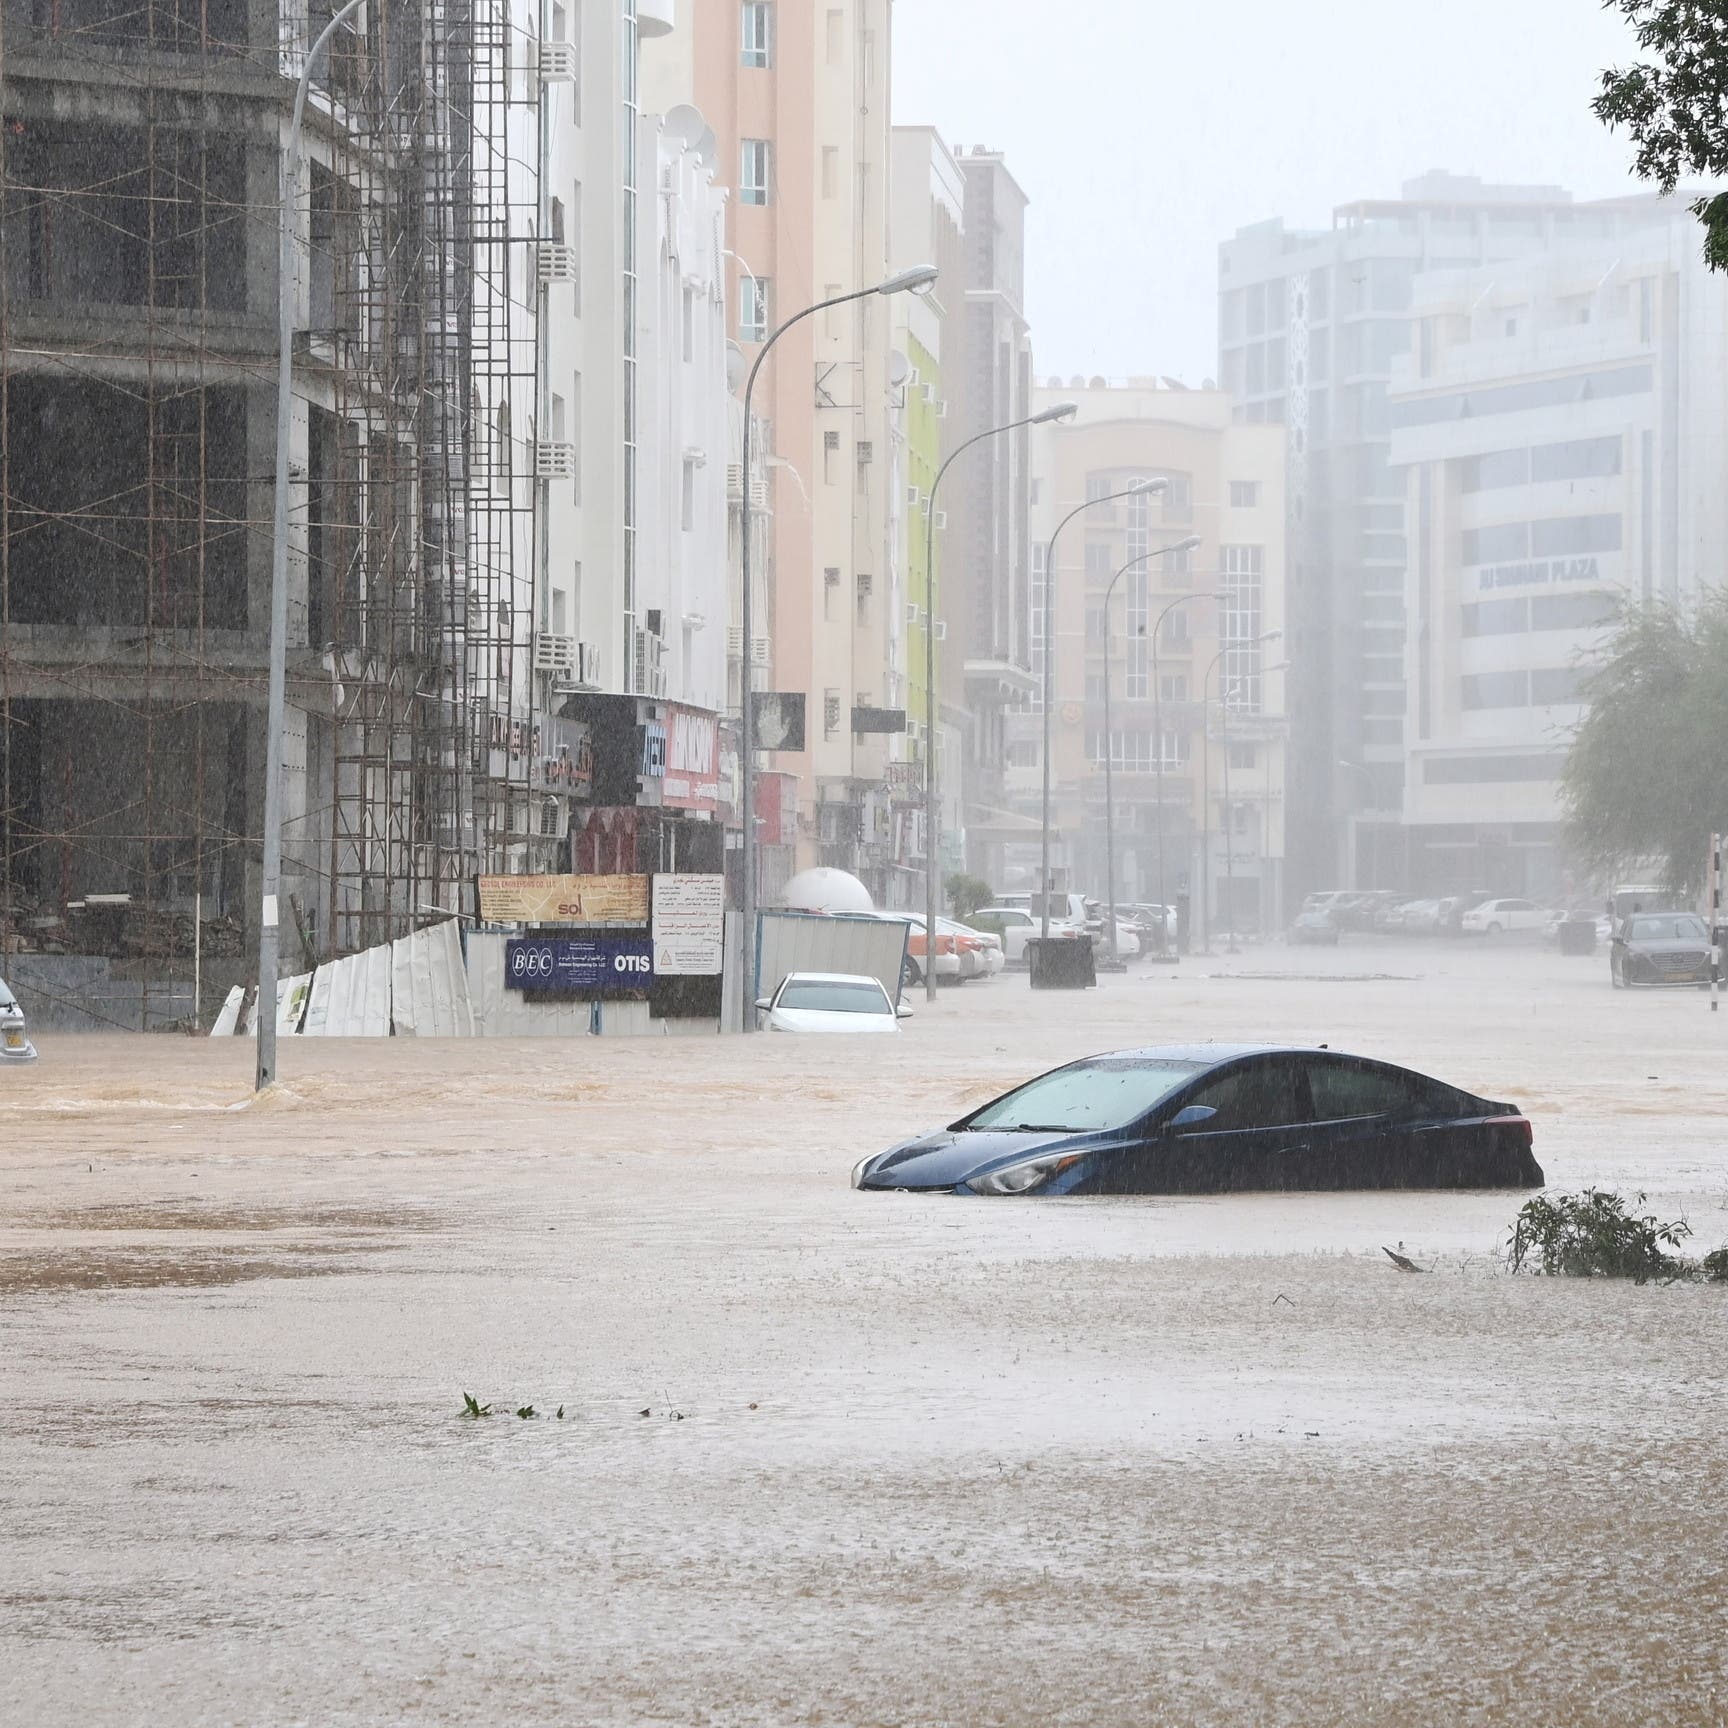 Shaheen storm: Abu Dhabi warns residents of heavy rains, winds, low visibility